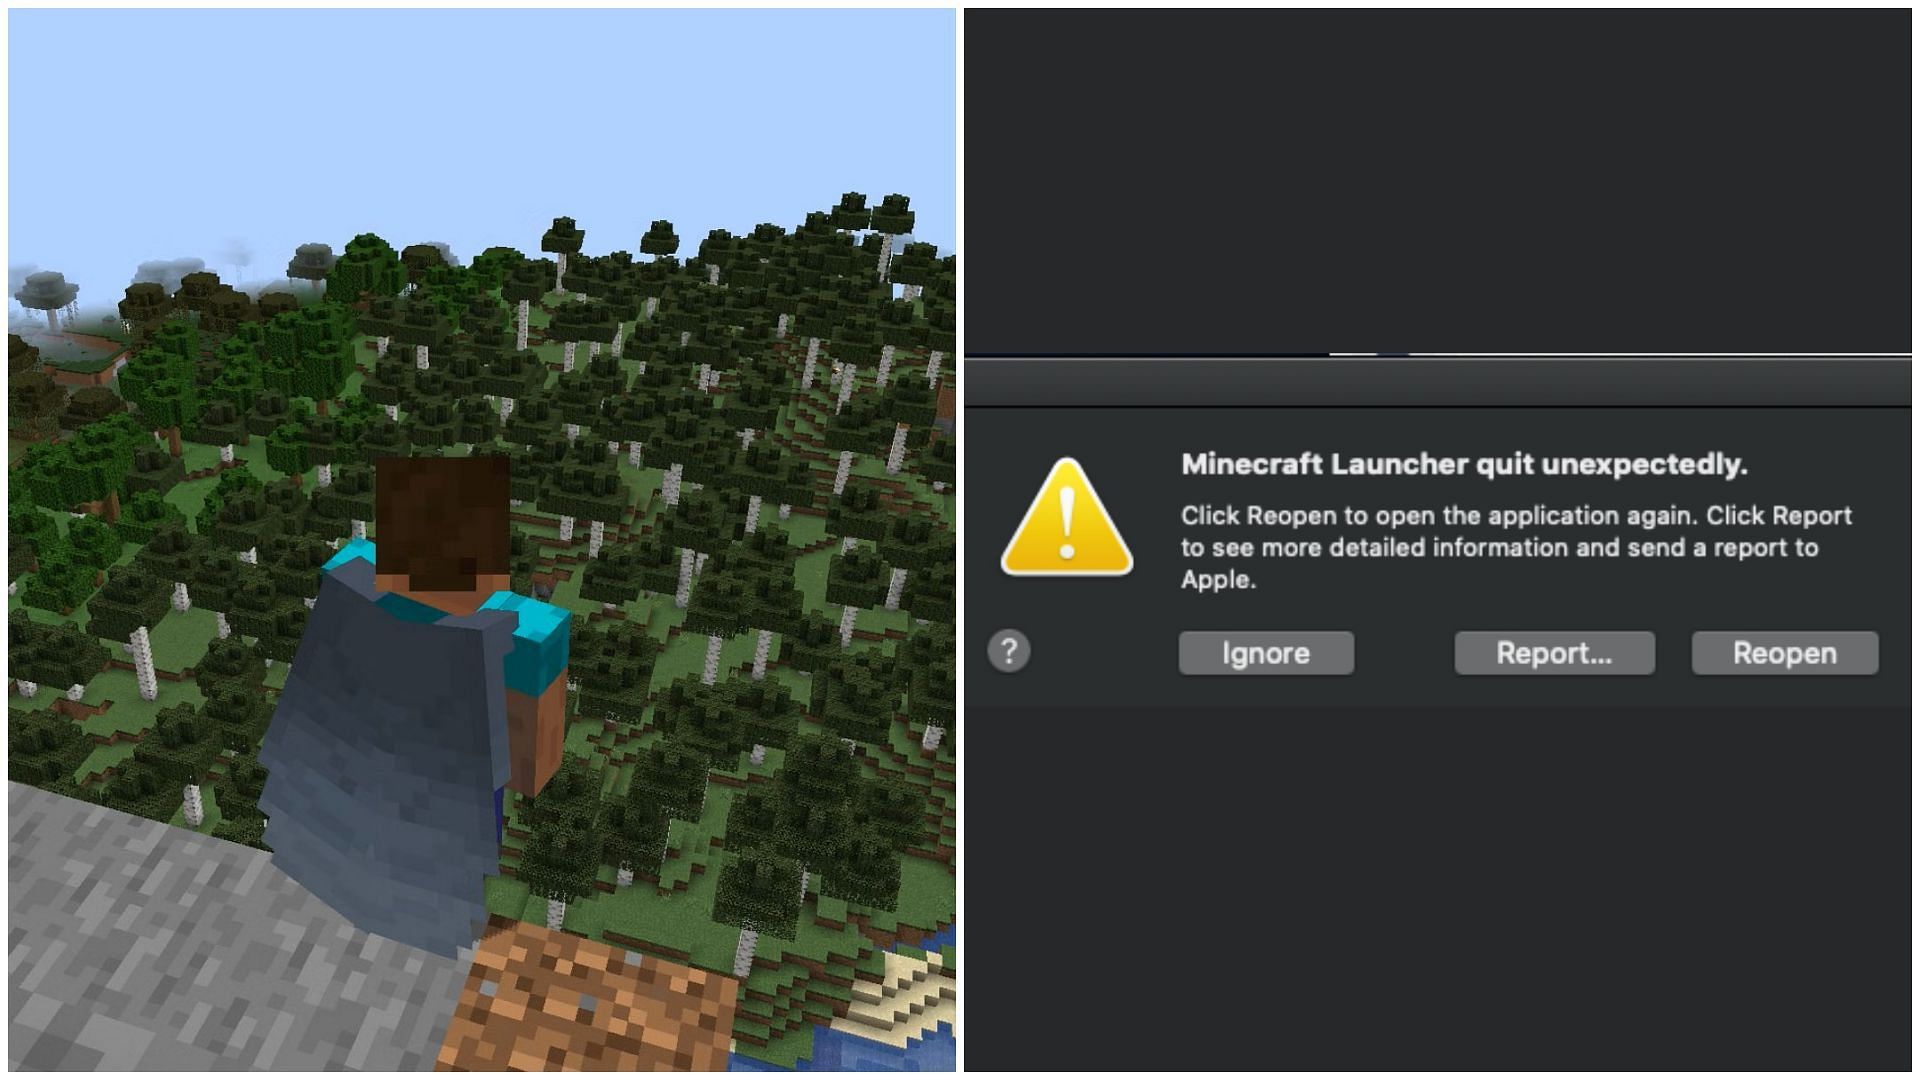 Minecraft launcher quit unexpectedly is a common issue for macOS (Image via Sportskeeda)